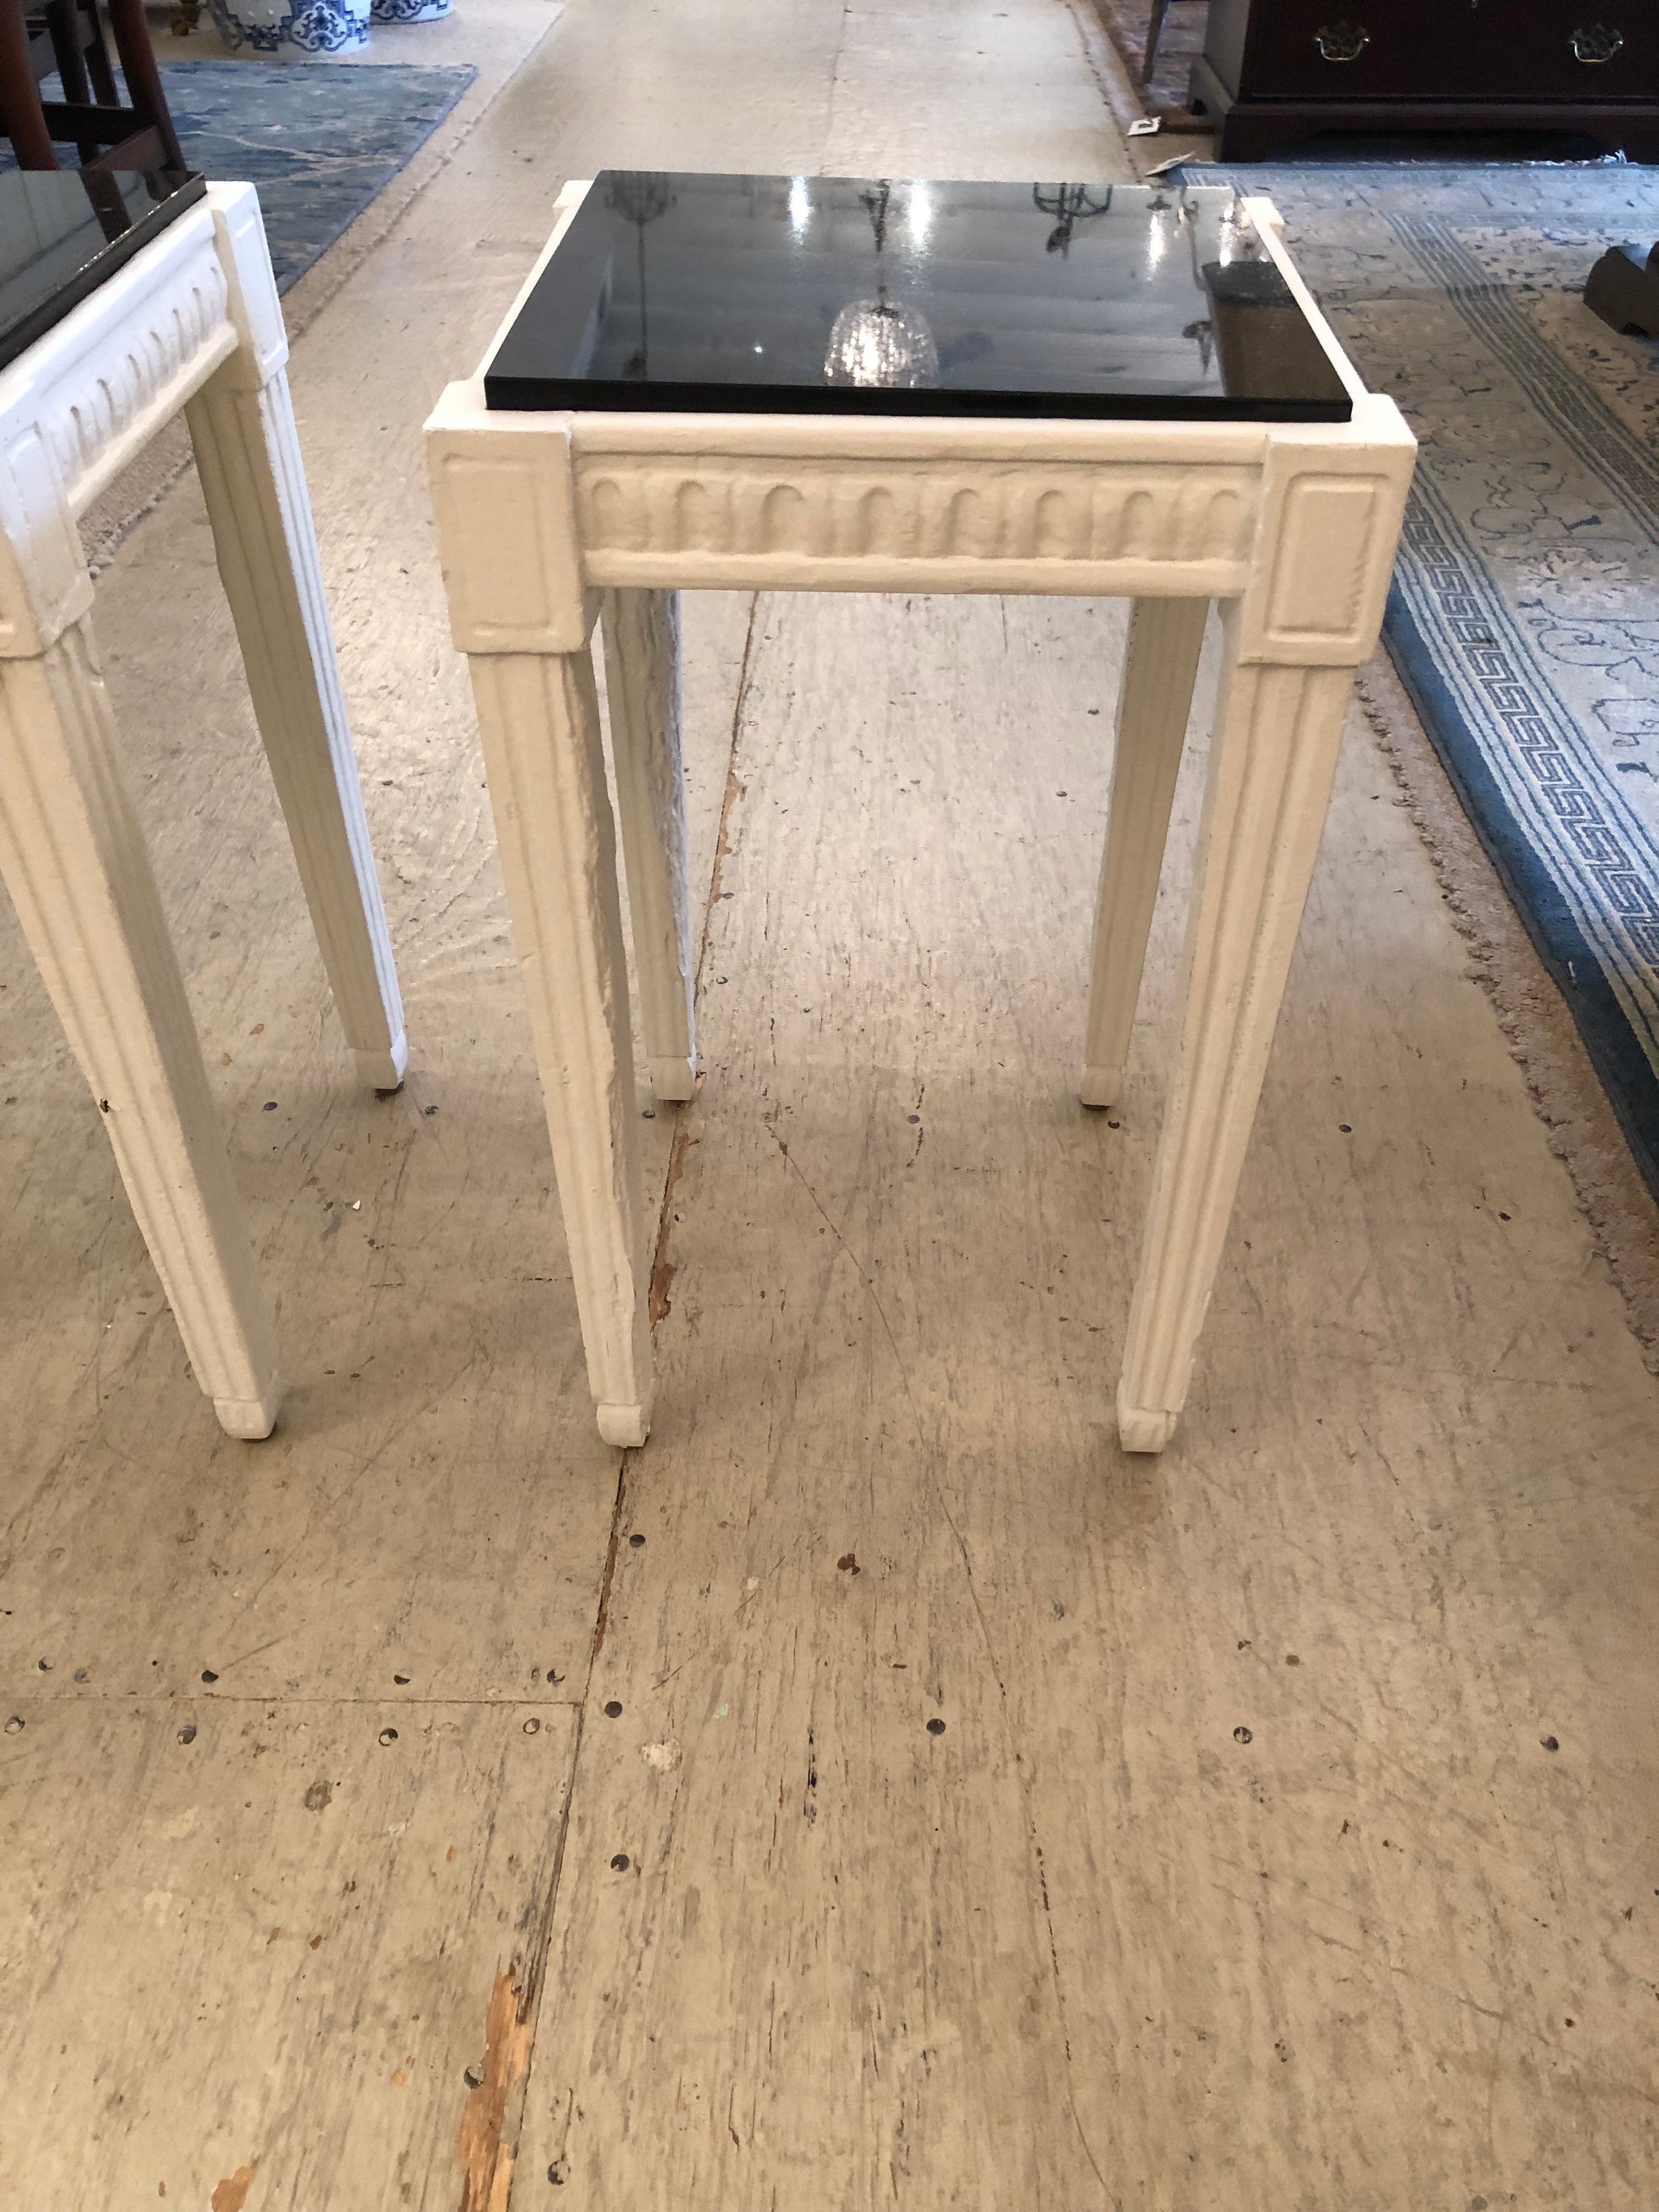 Stylish and versatile square martini tables having carved wood painted white bases and sleek glamorous black marble tops.